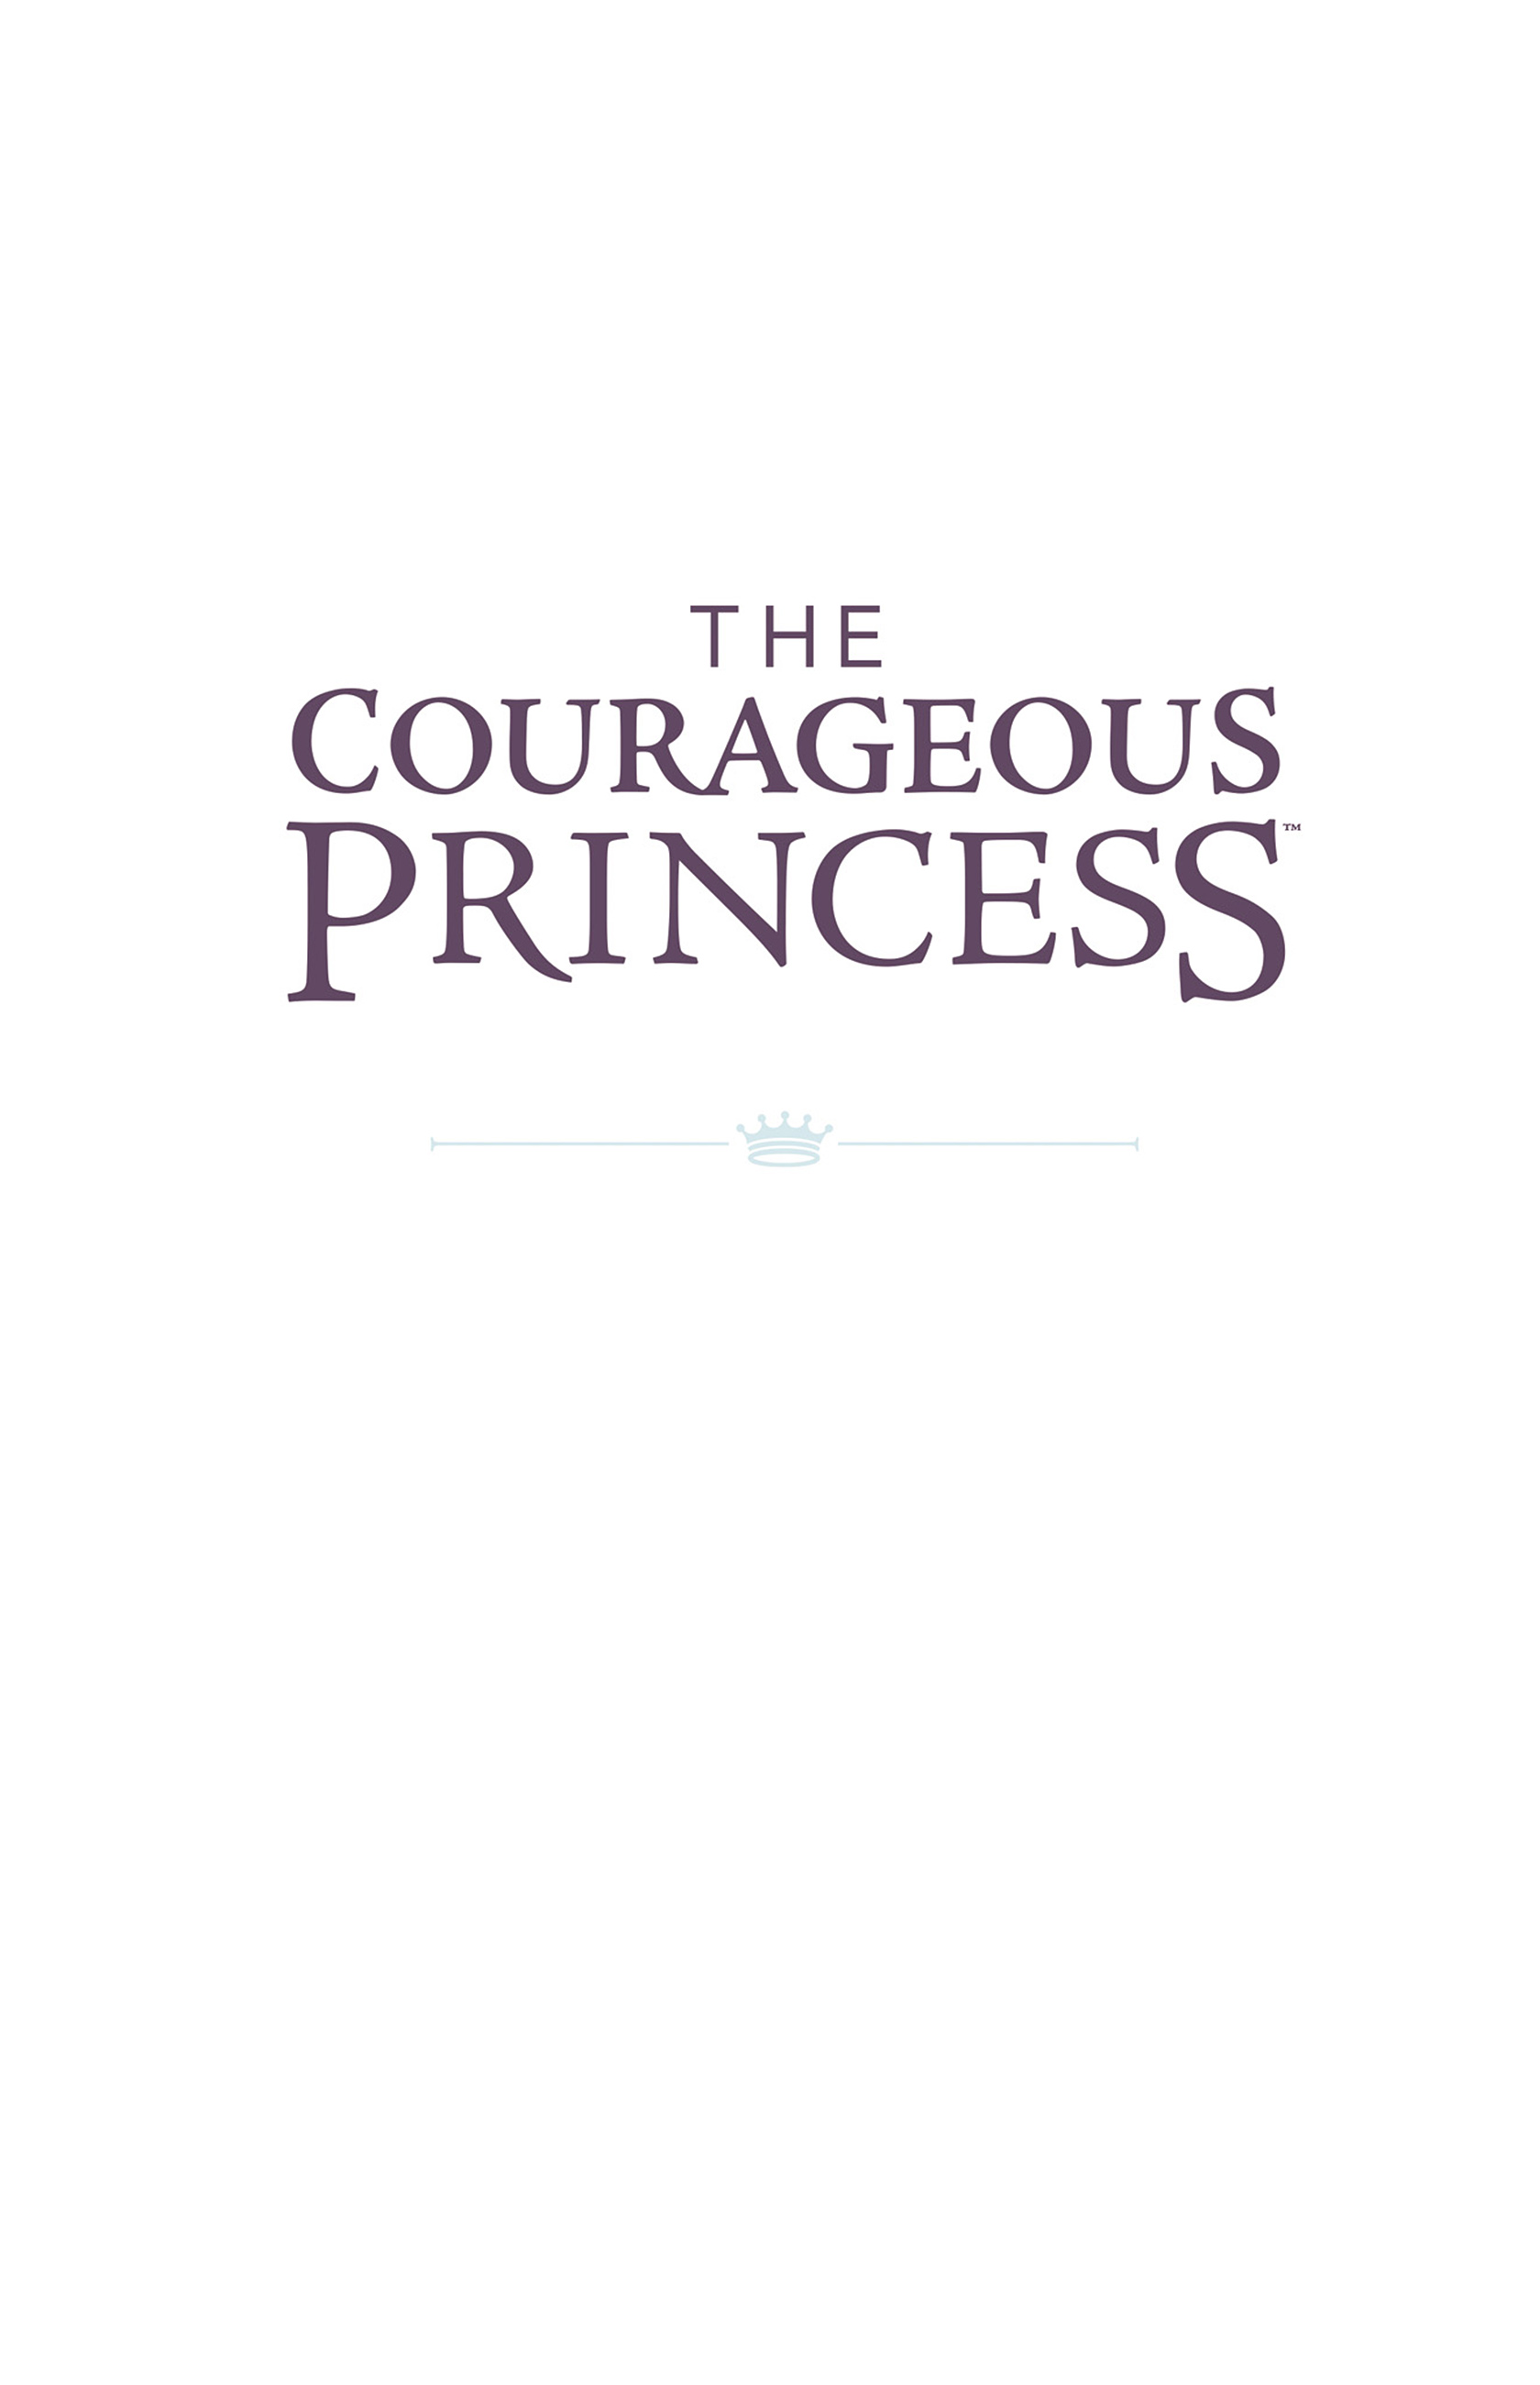 Read online Courageous Princess comic -  Issue # TPB 1 - 2